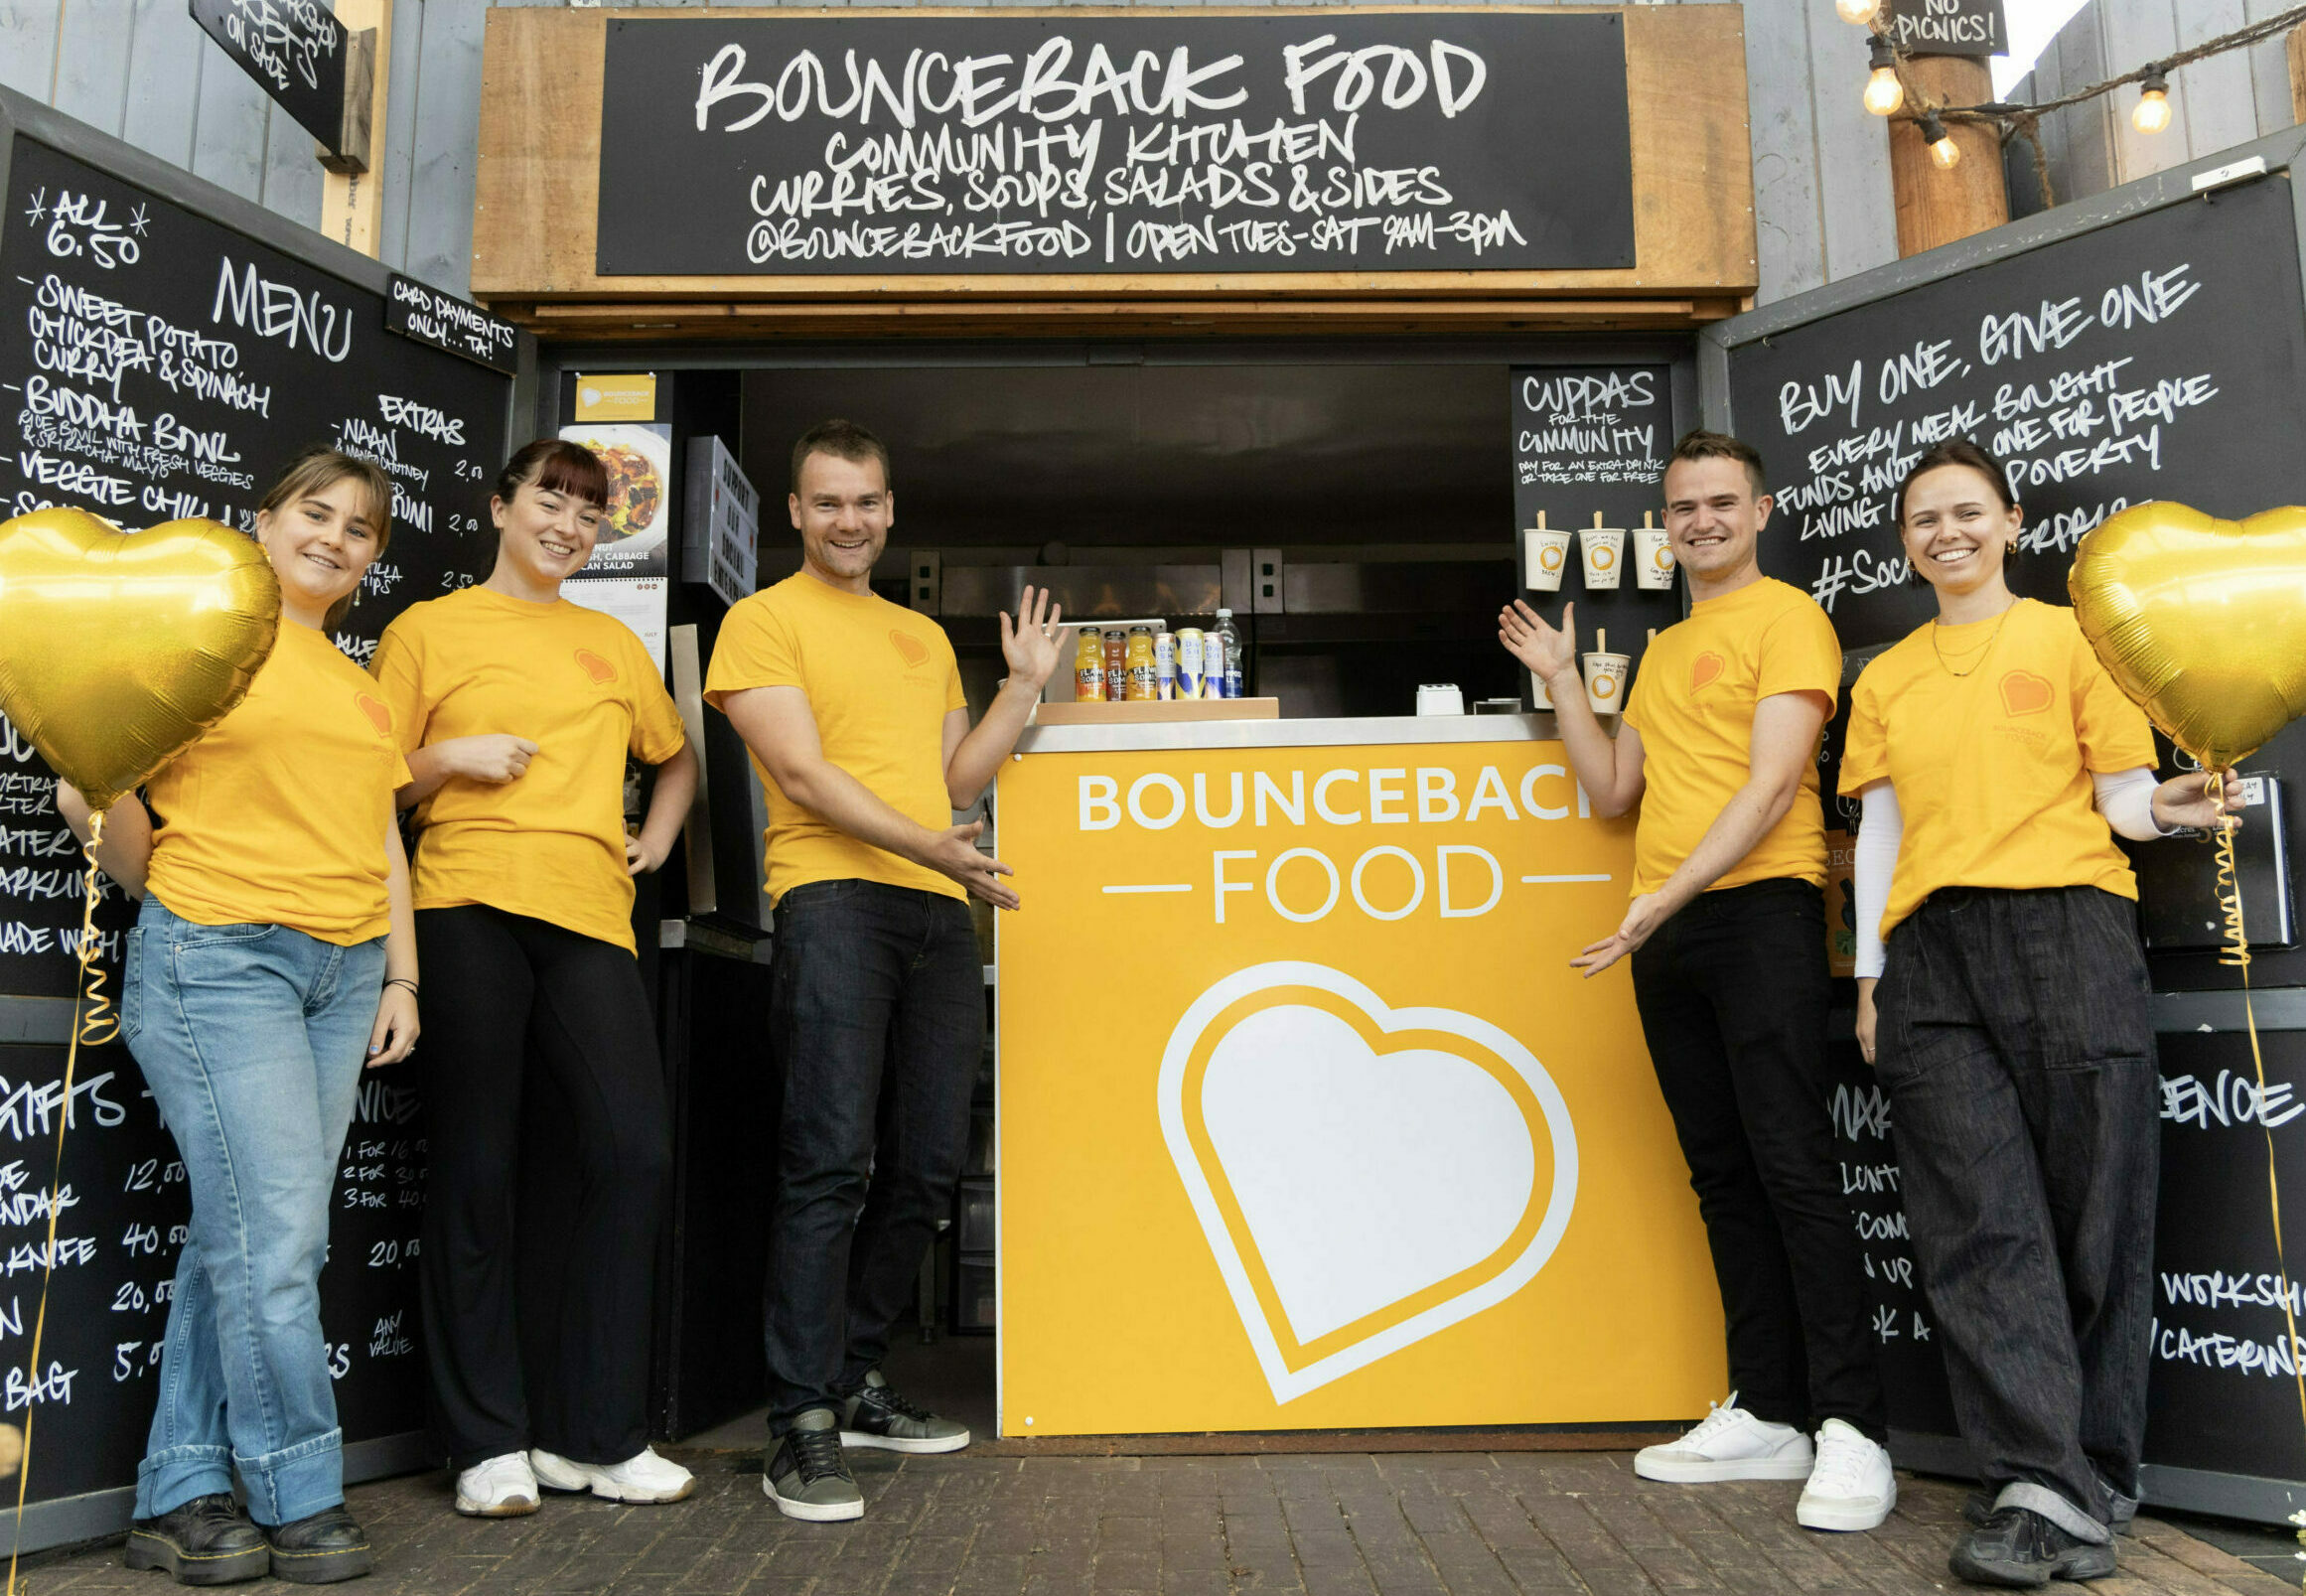 The Bounceback Food team in Manchester stood outside the new Community Kitchen at Altrincham Market.